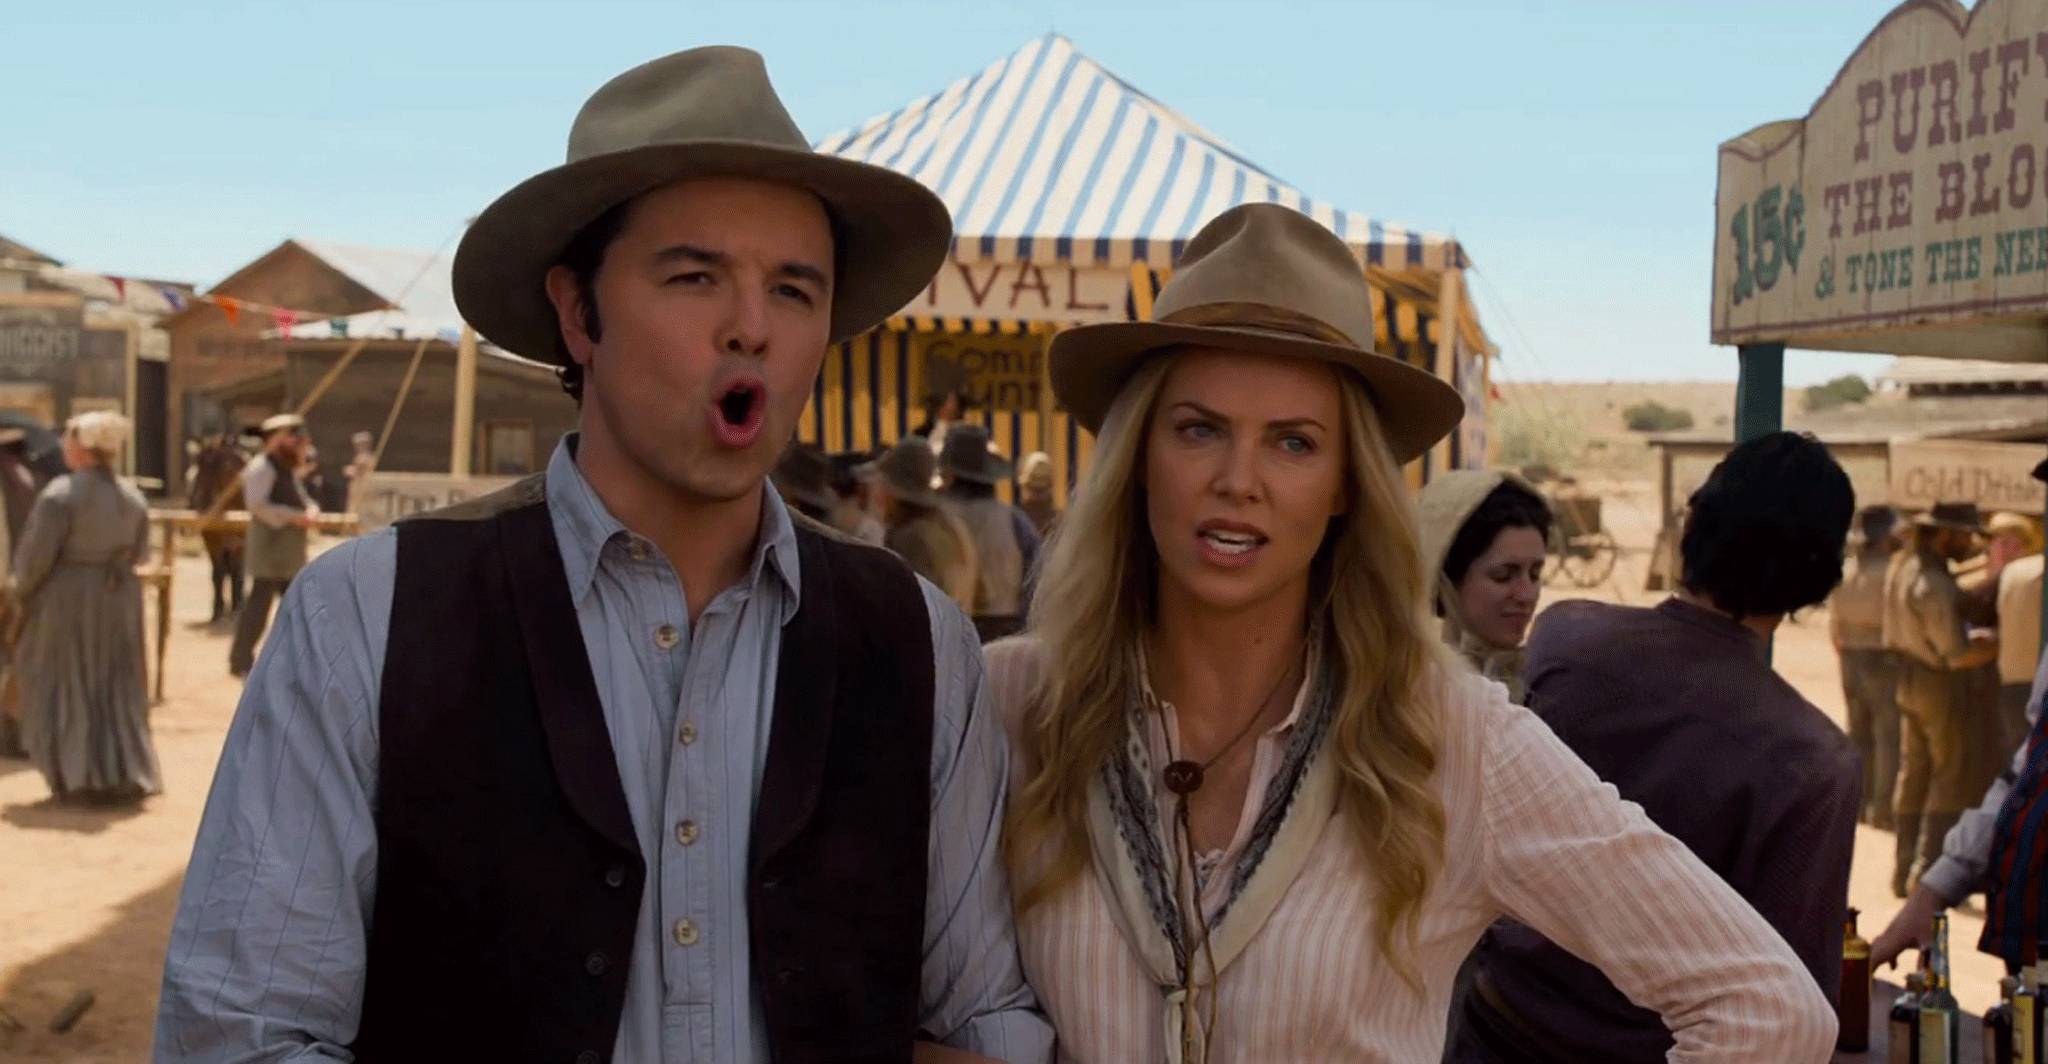 Seth MacFarlane and Charlize Theron star in A Million Ways to Die in the West